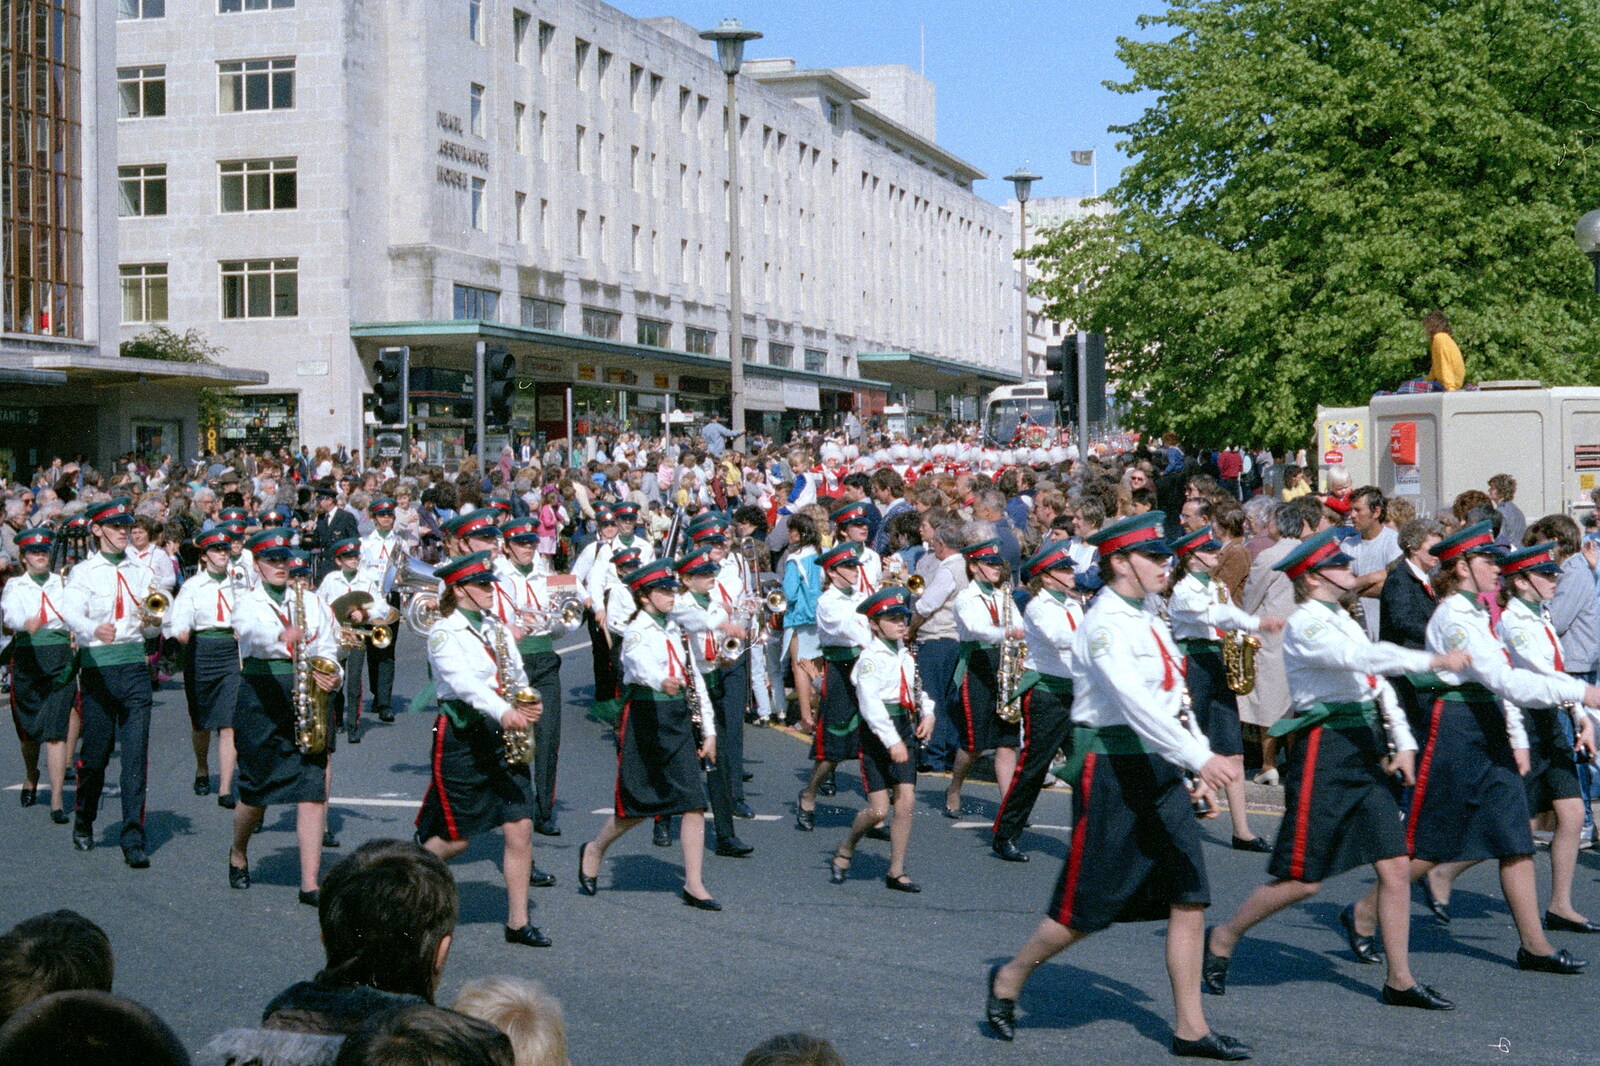 Another marching band reaches Derry's Cross from Uni: The Lord Mayor's Procession, Plymouth, Devon - 21st May 1986